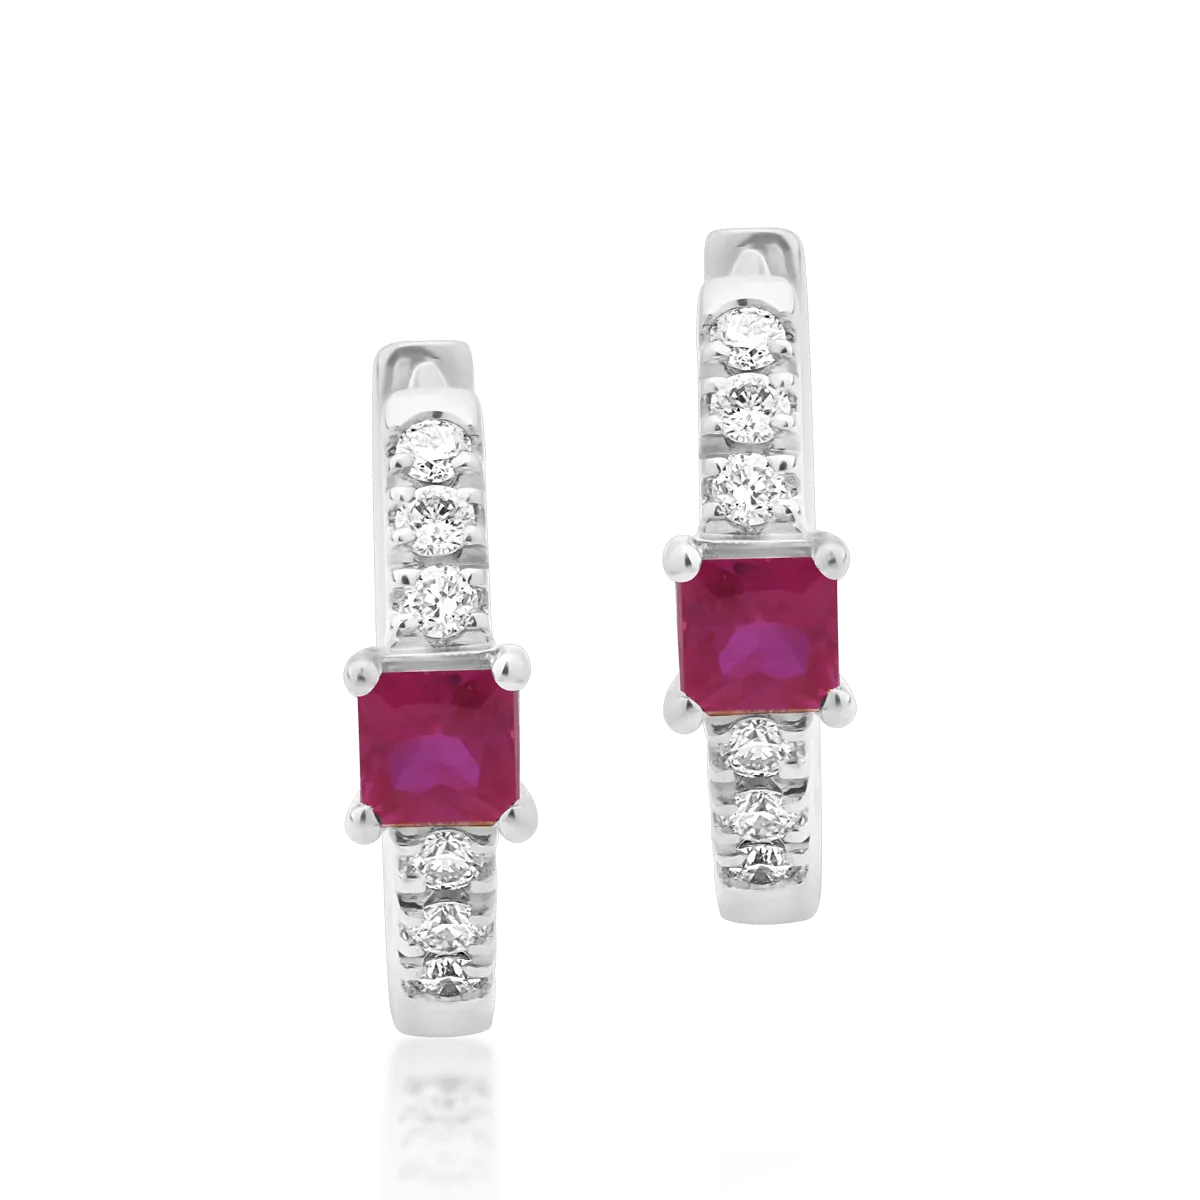 18K white gold earrings with 0.14ct rubies and 0.06ct diamonds